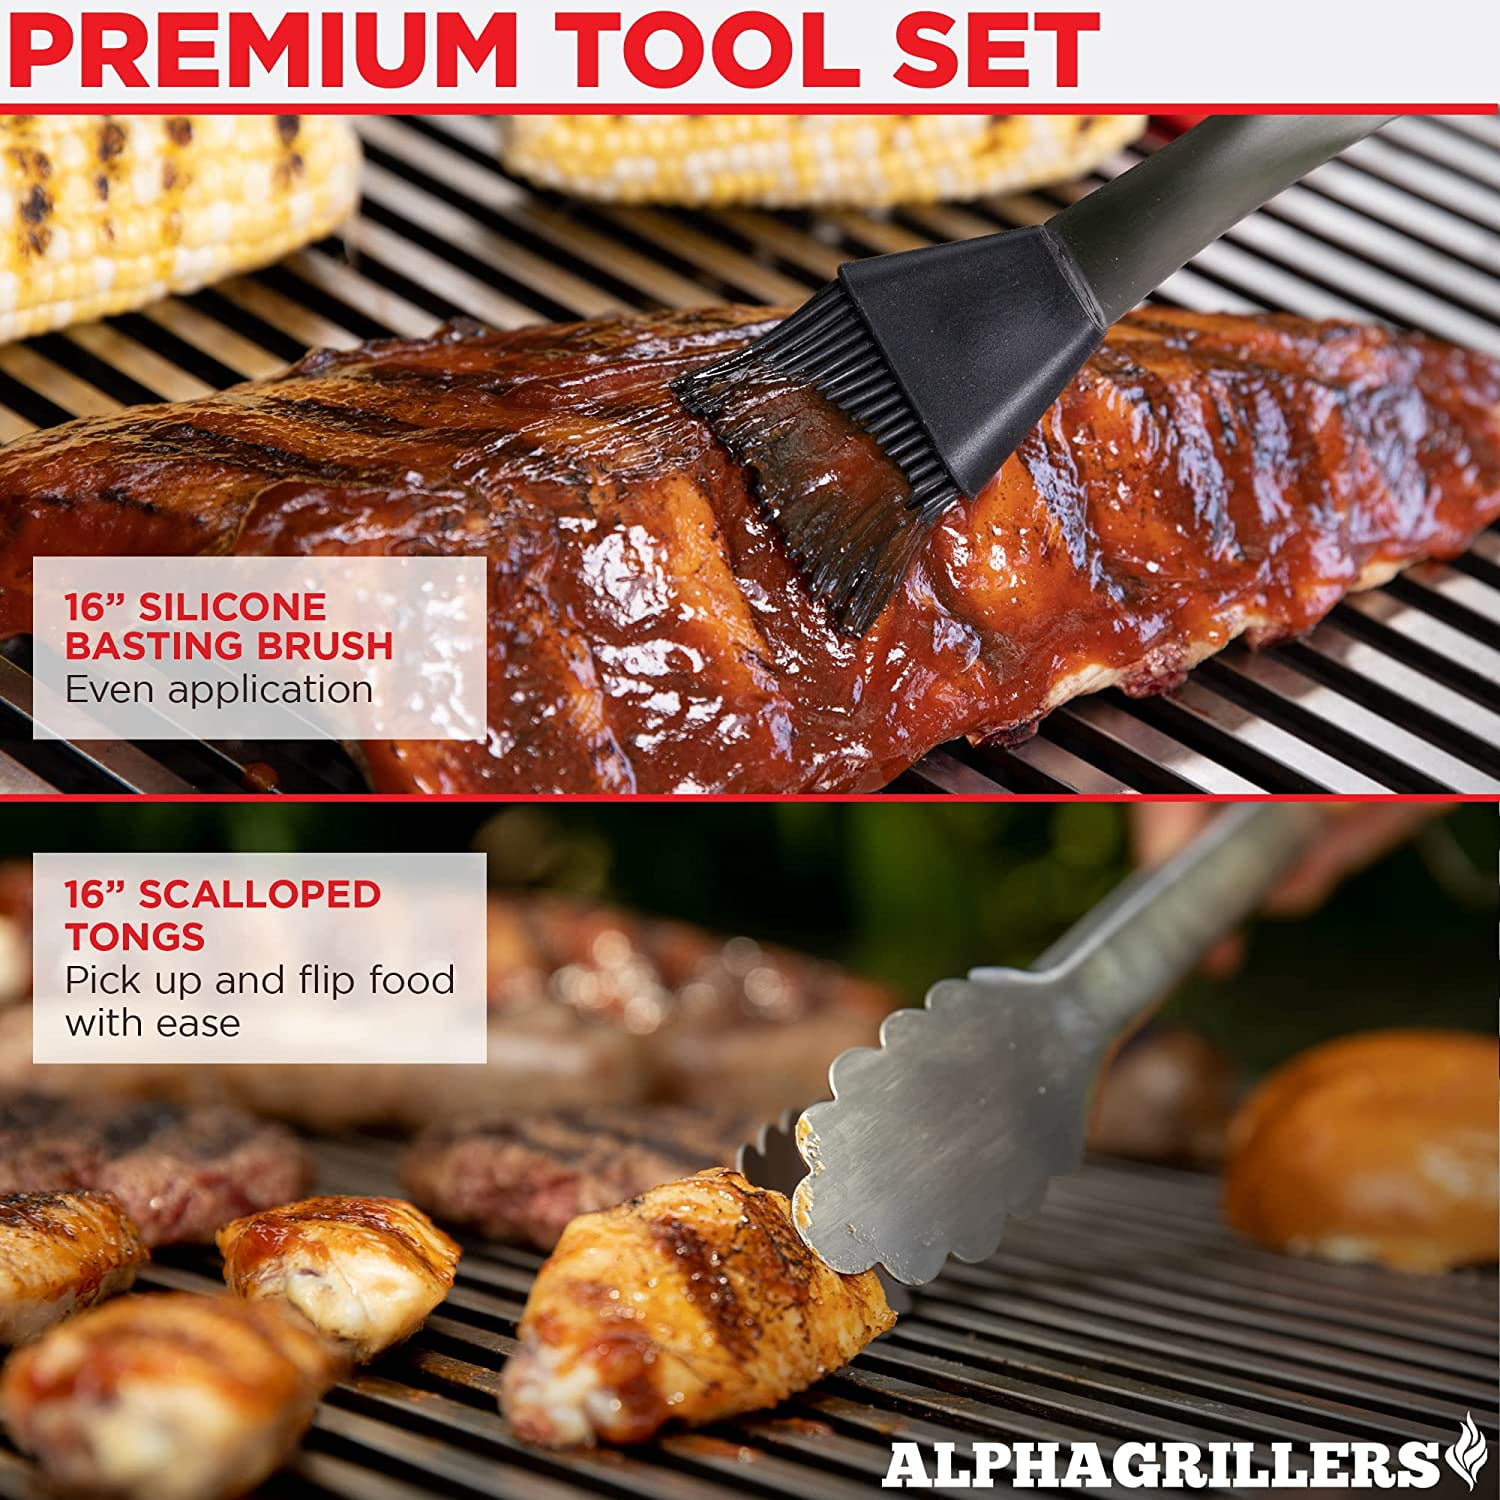 Alpha Grillers Cast Iron Pot & BBQ Brushes for Sauce - 24 oz Cast Iron  Saucepan & Basting Brush BBQ Mop - Gifts for Dad - Premium Cast Iron  Cookware 